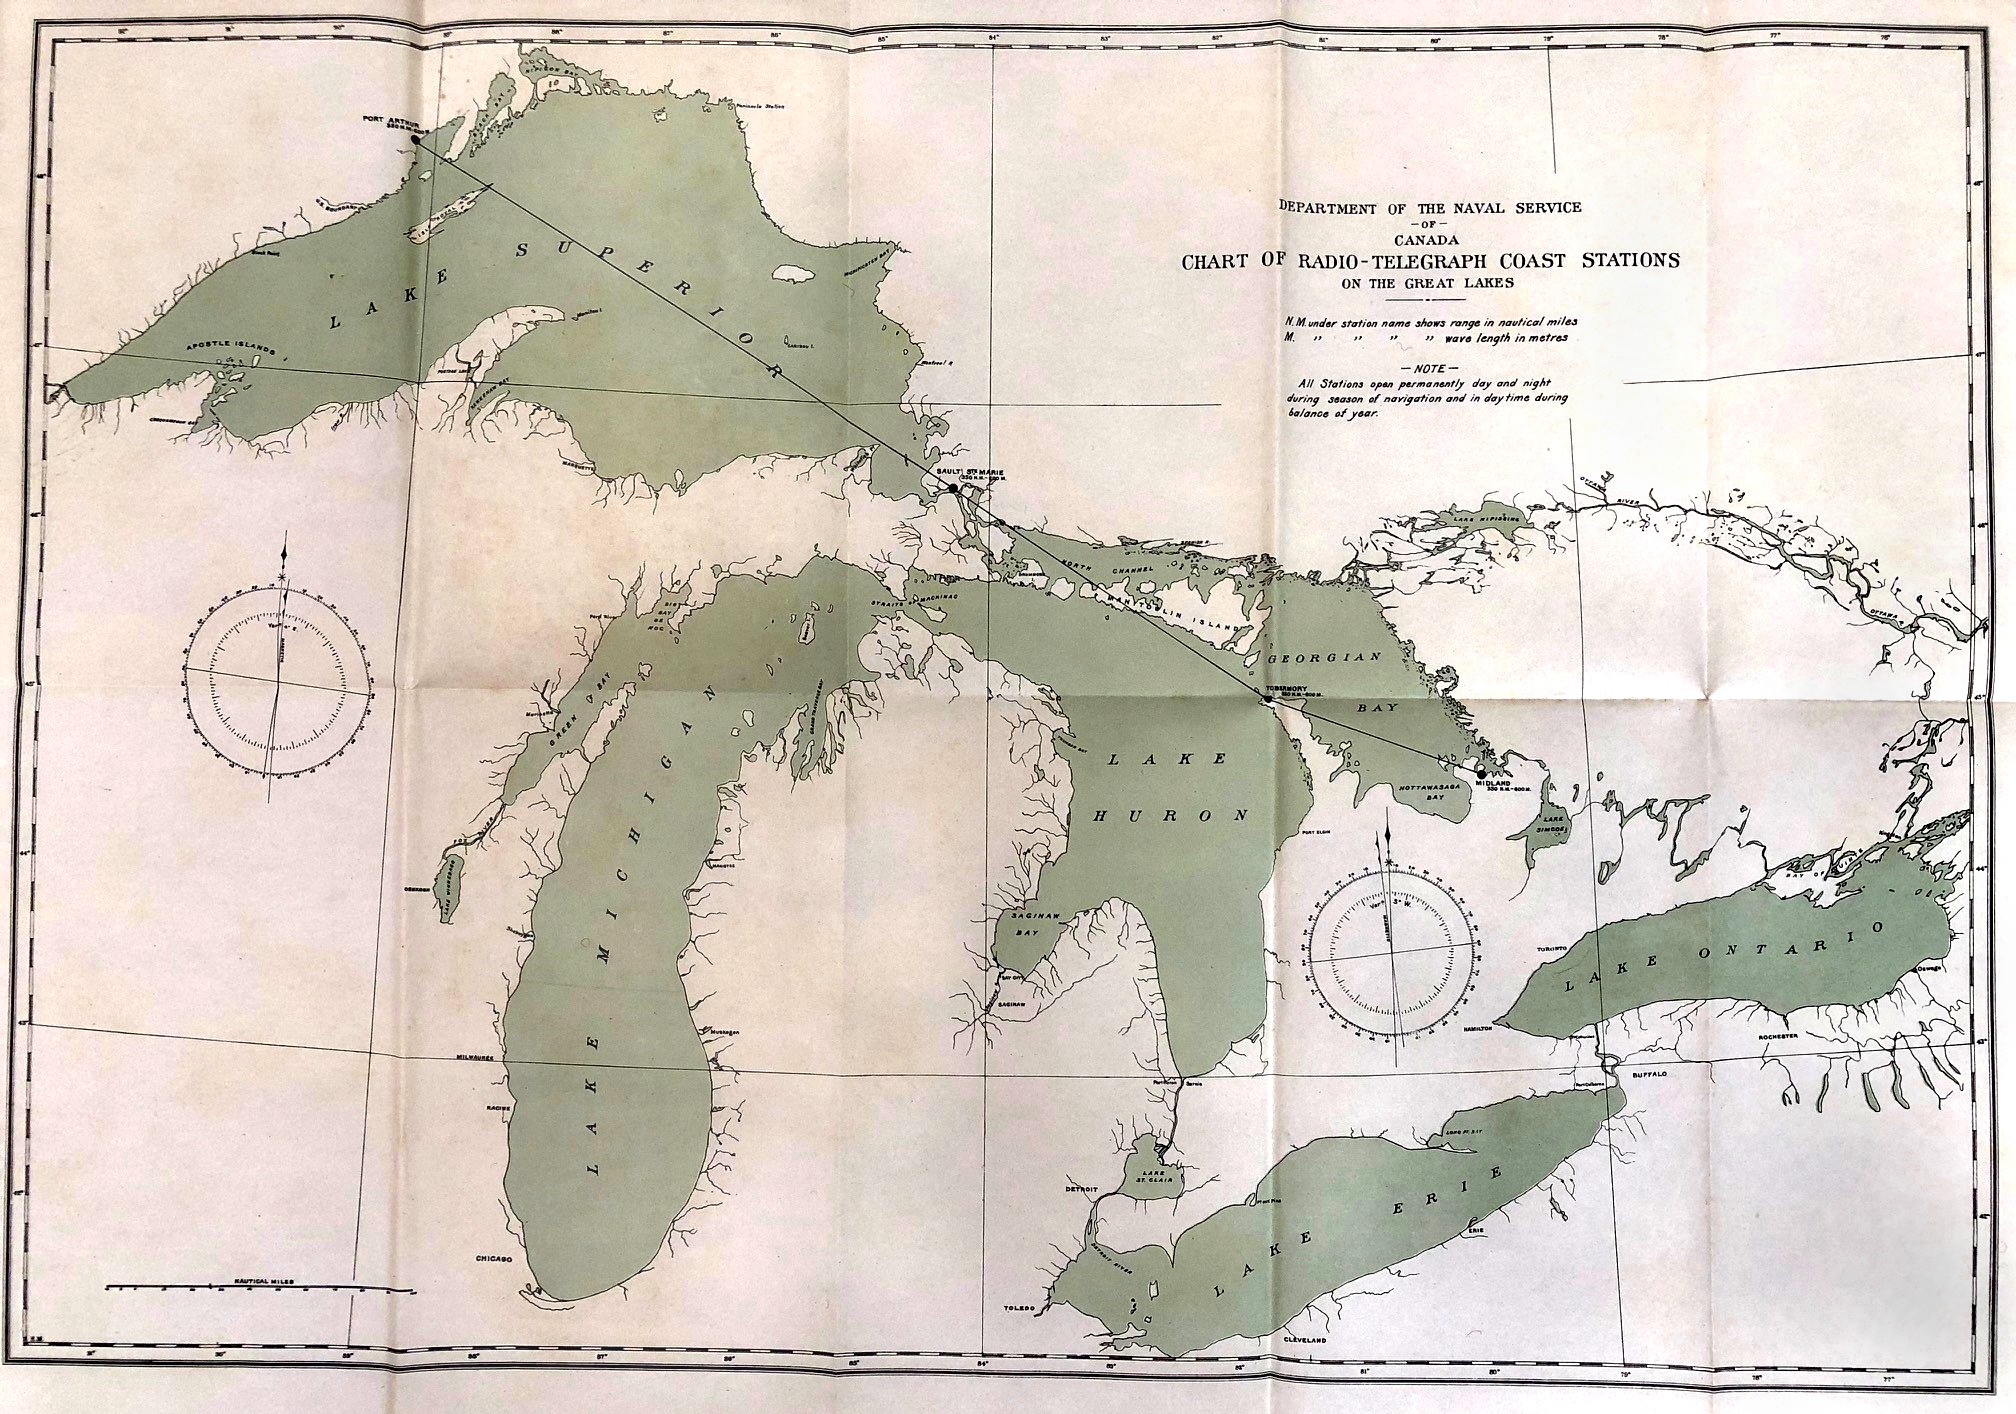 1912 Map of Great Lakes Canadian Radio-Telegraph Stations